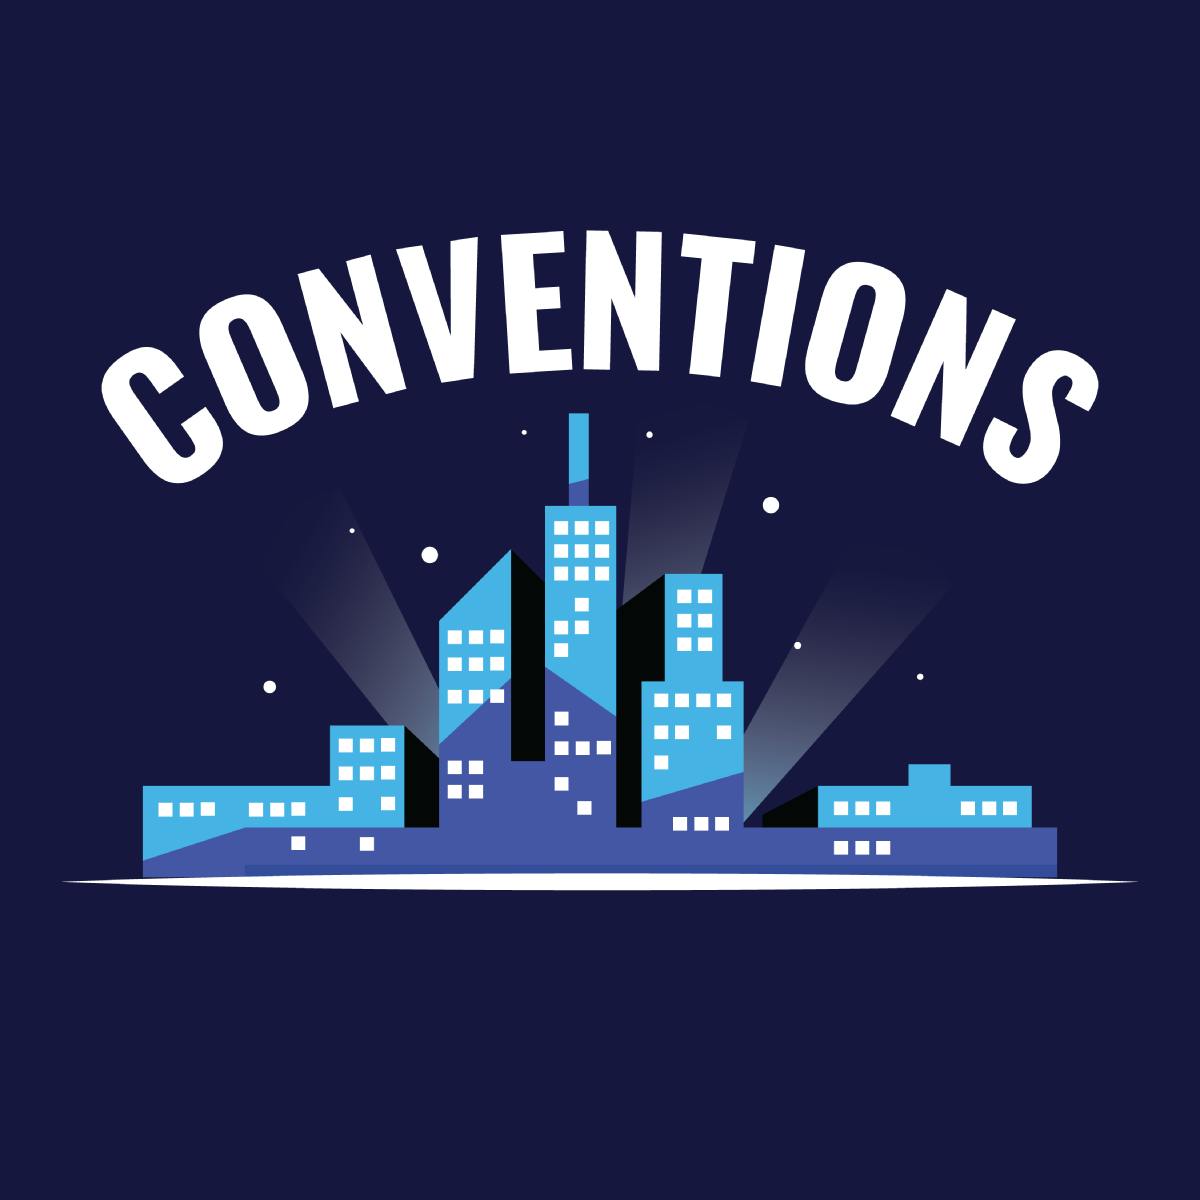 Conventions / Expos